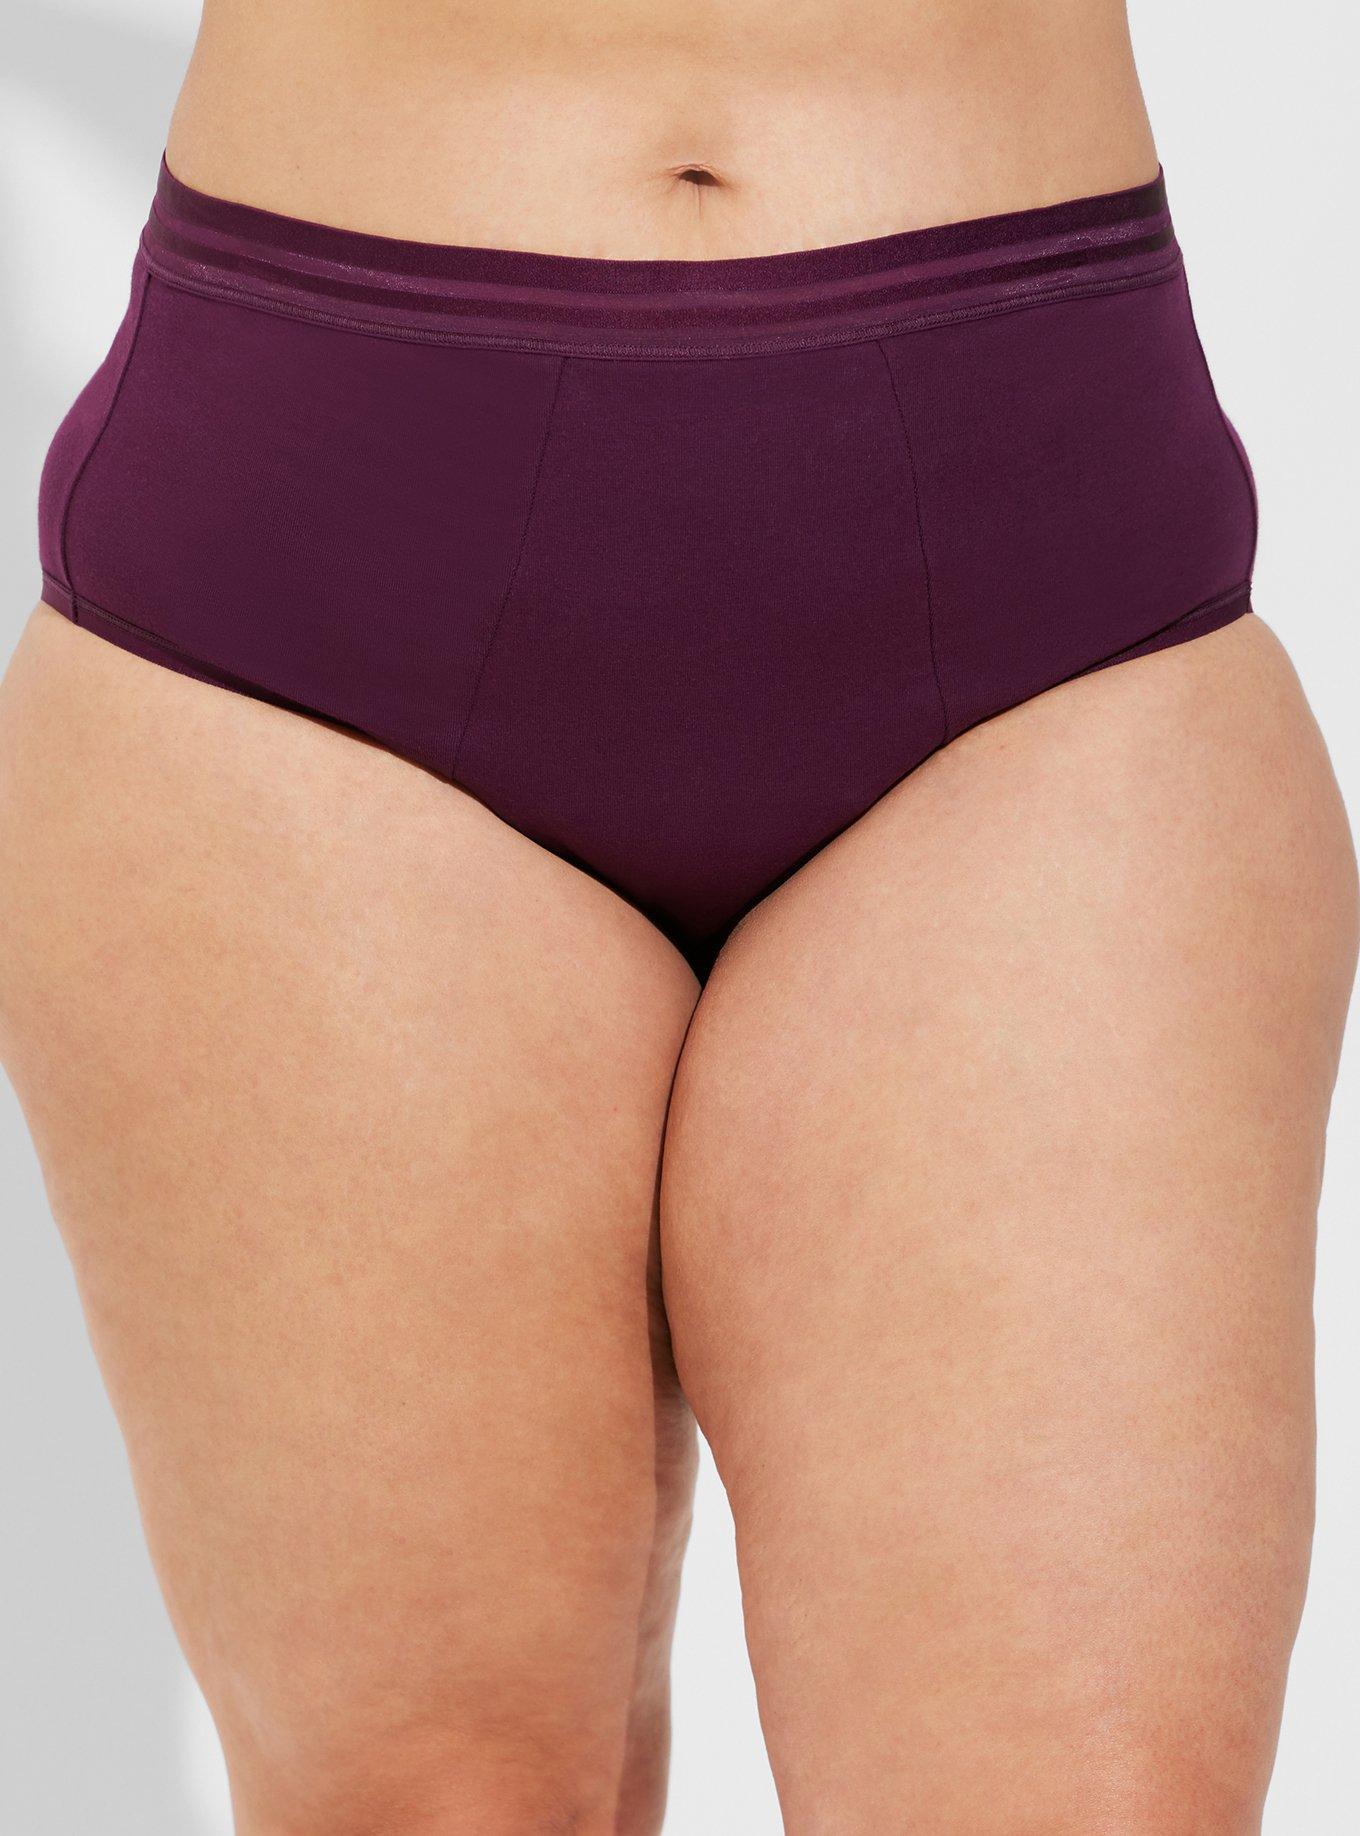 Leakproof Confidence: Heavy Flow Period Panties, India & USA Patented